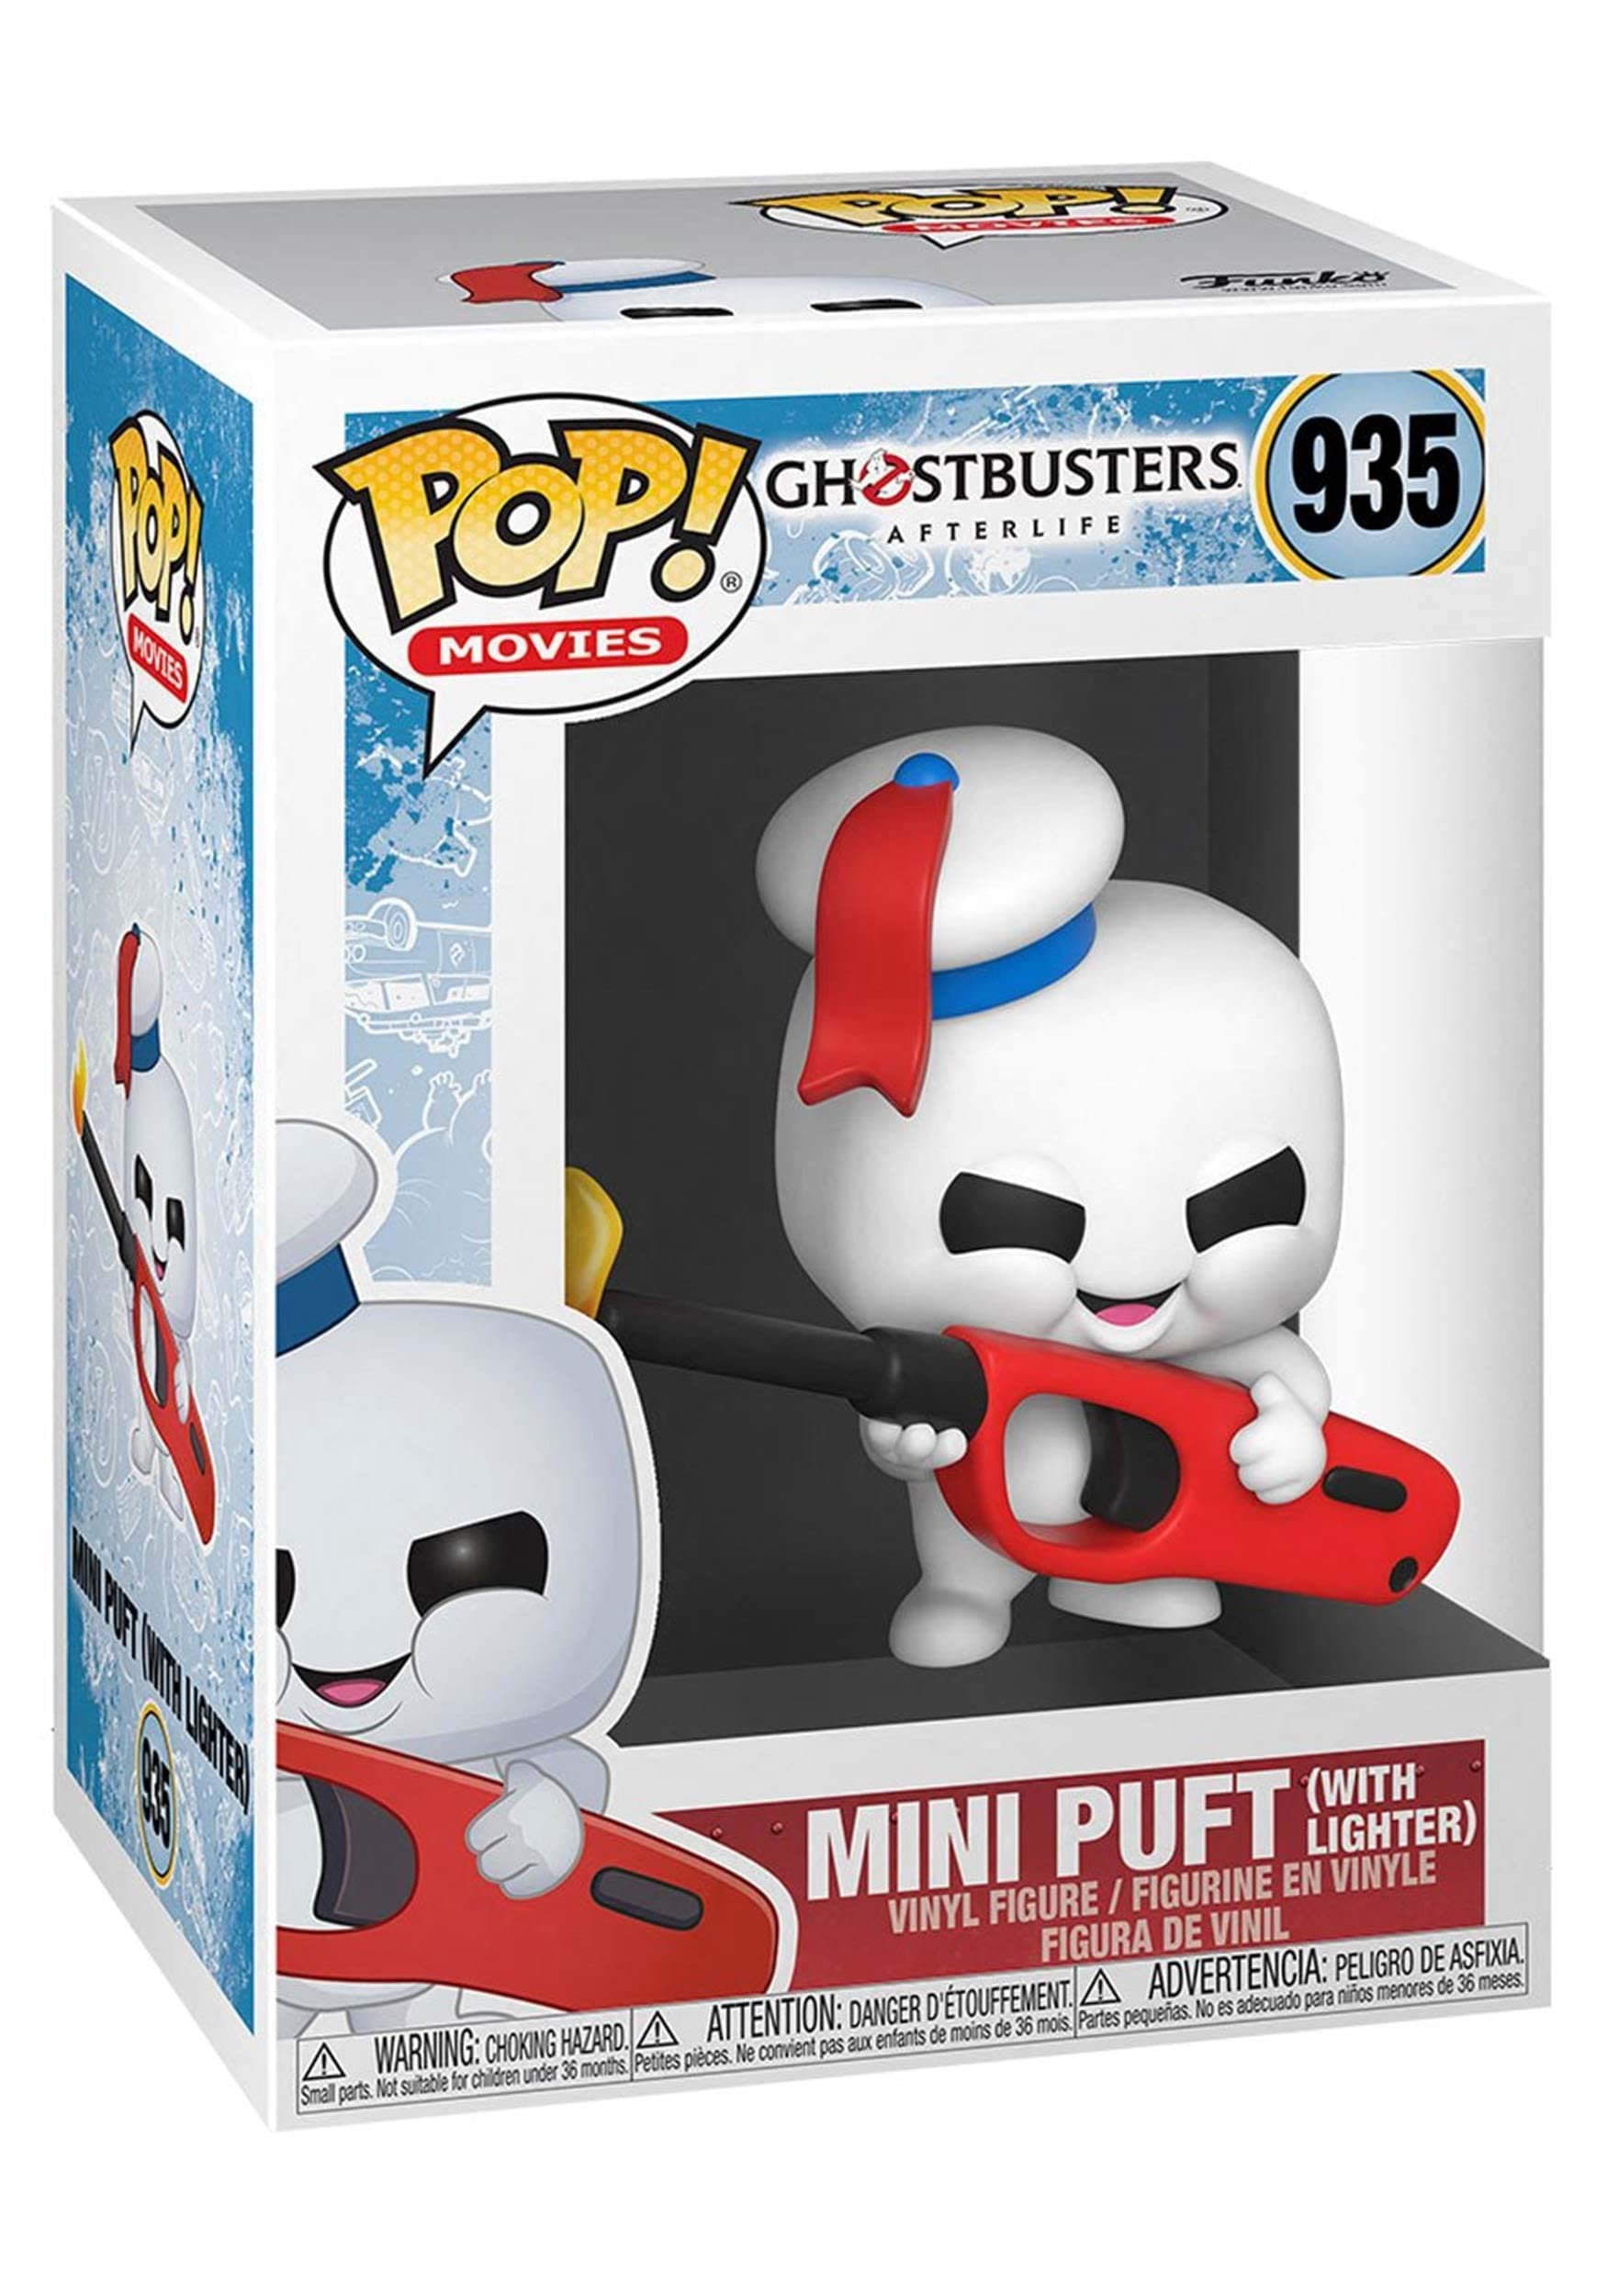 Movies: Ghostbusters Afterlife - Mini Puft with Lighter Pop! Vinyl Figure (935)